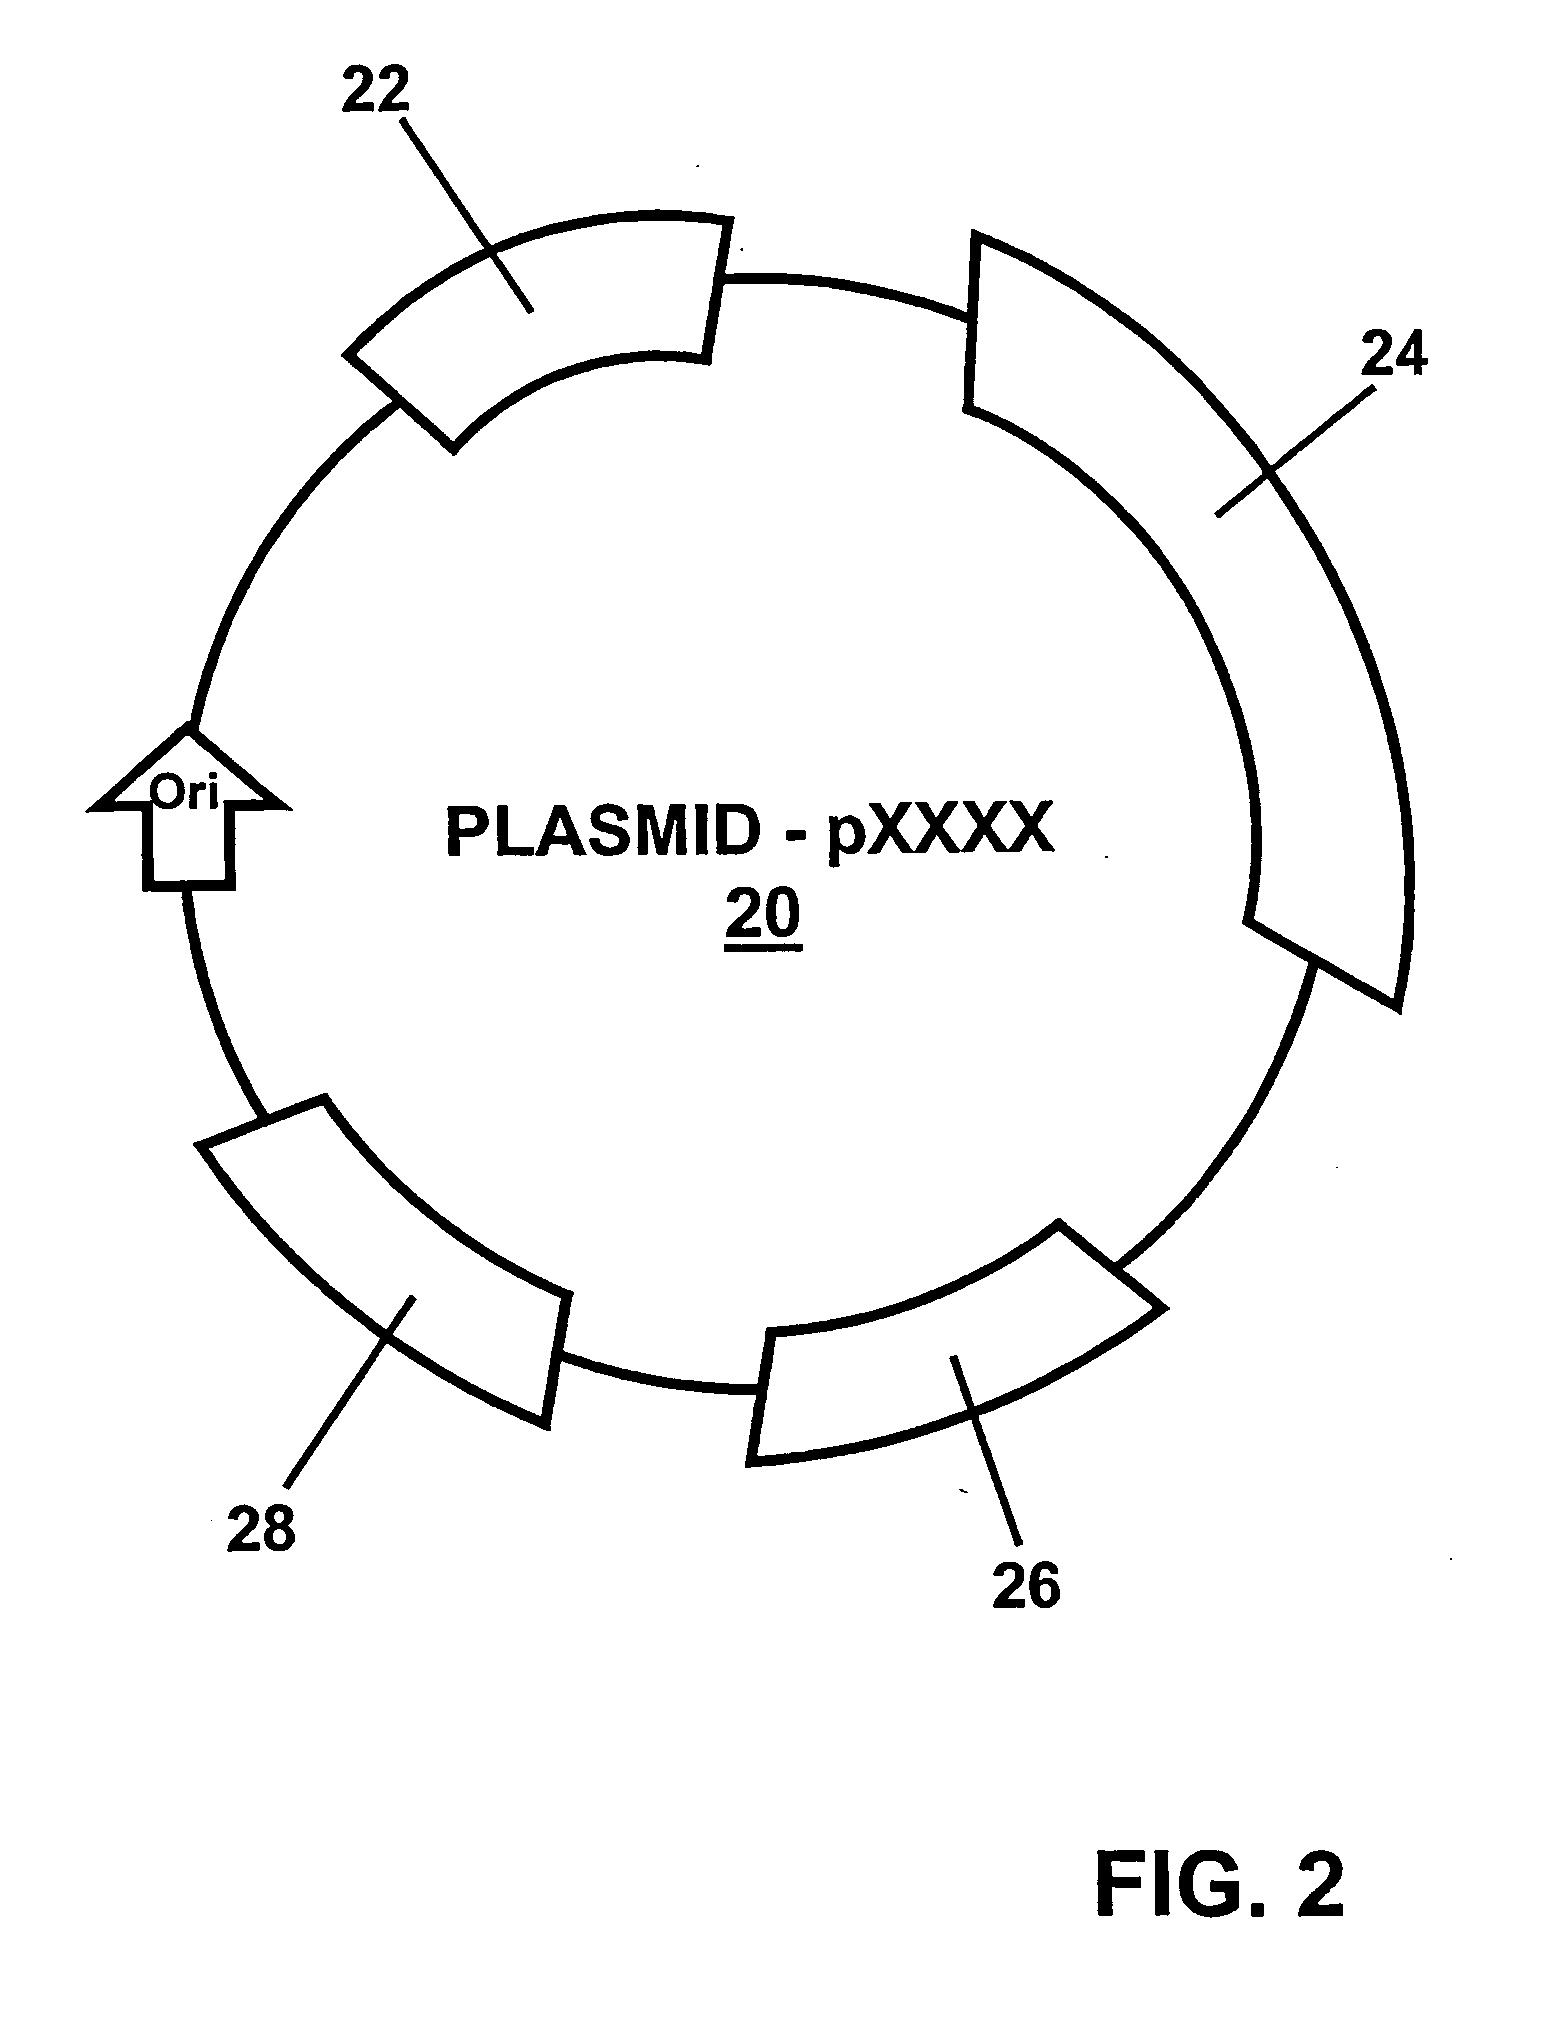 Method and agent for treating vulnerable plaque